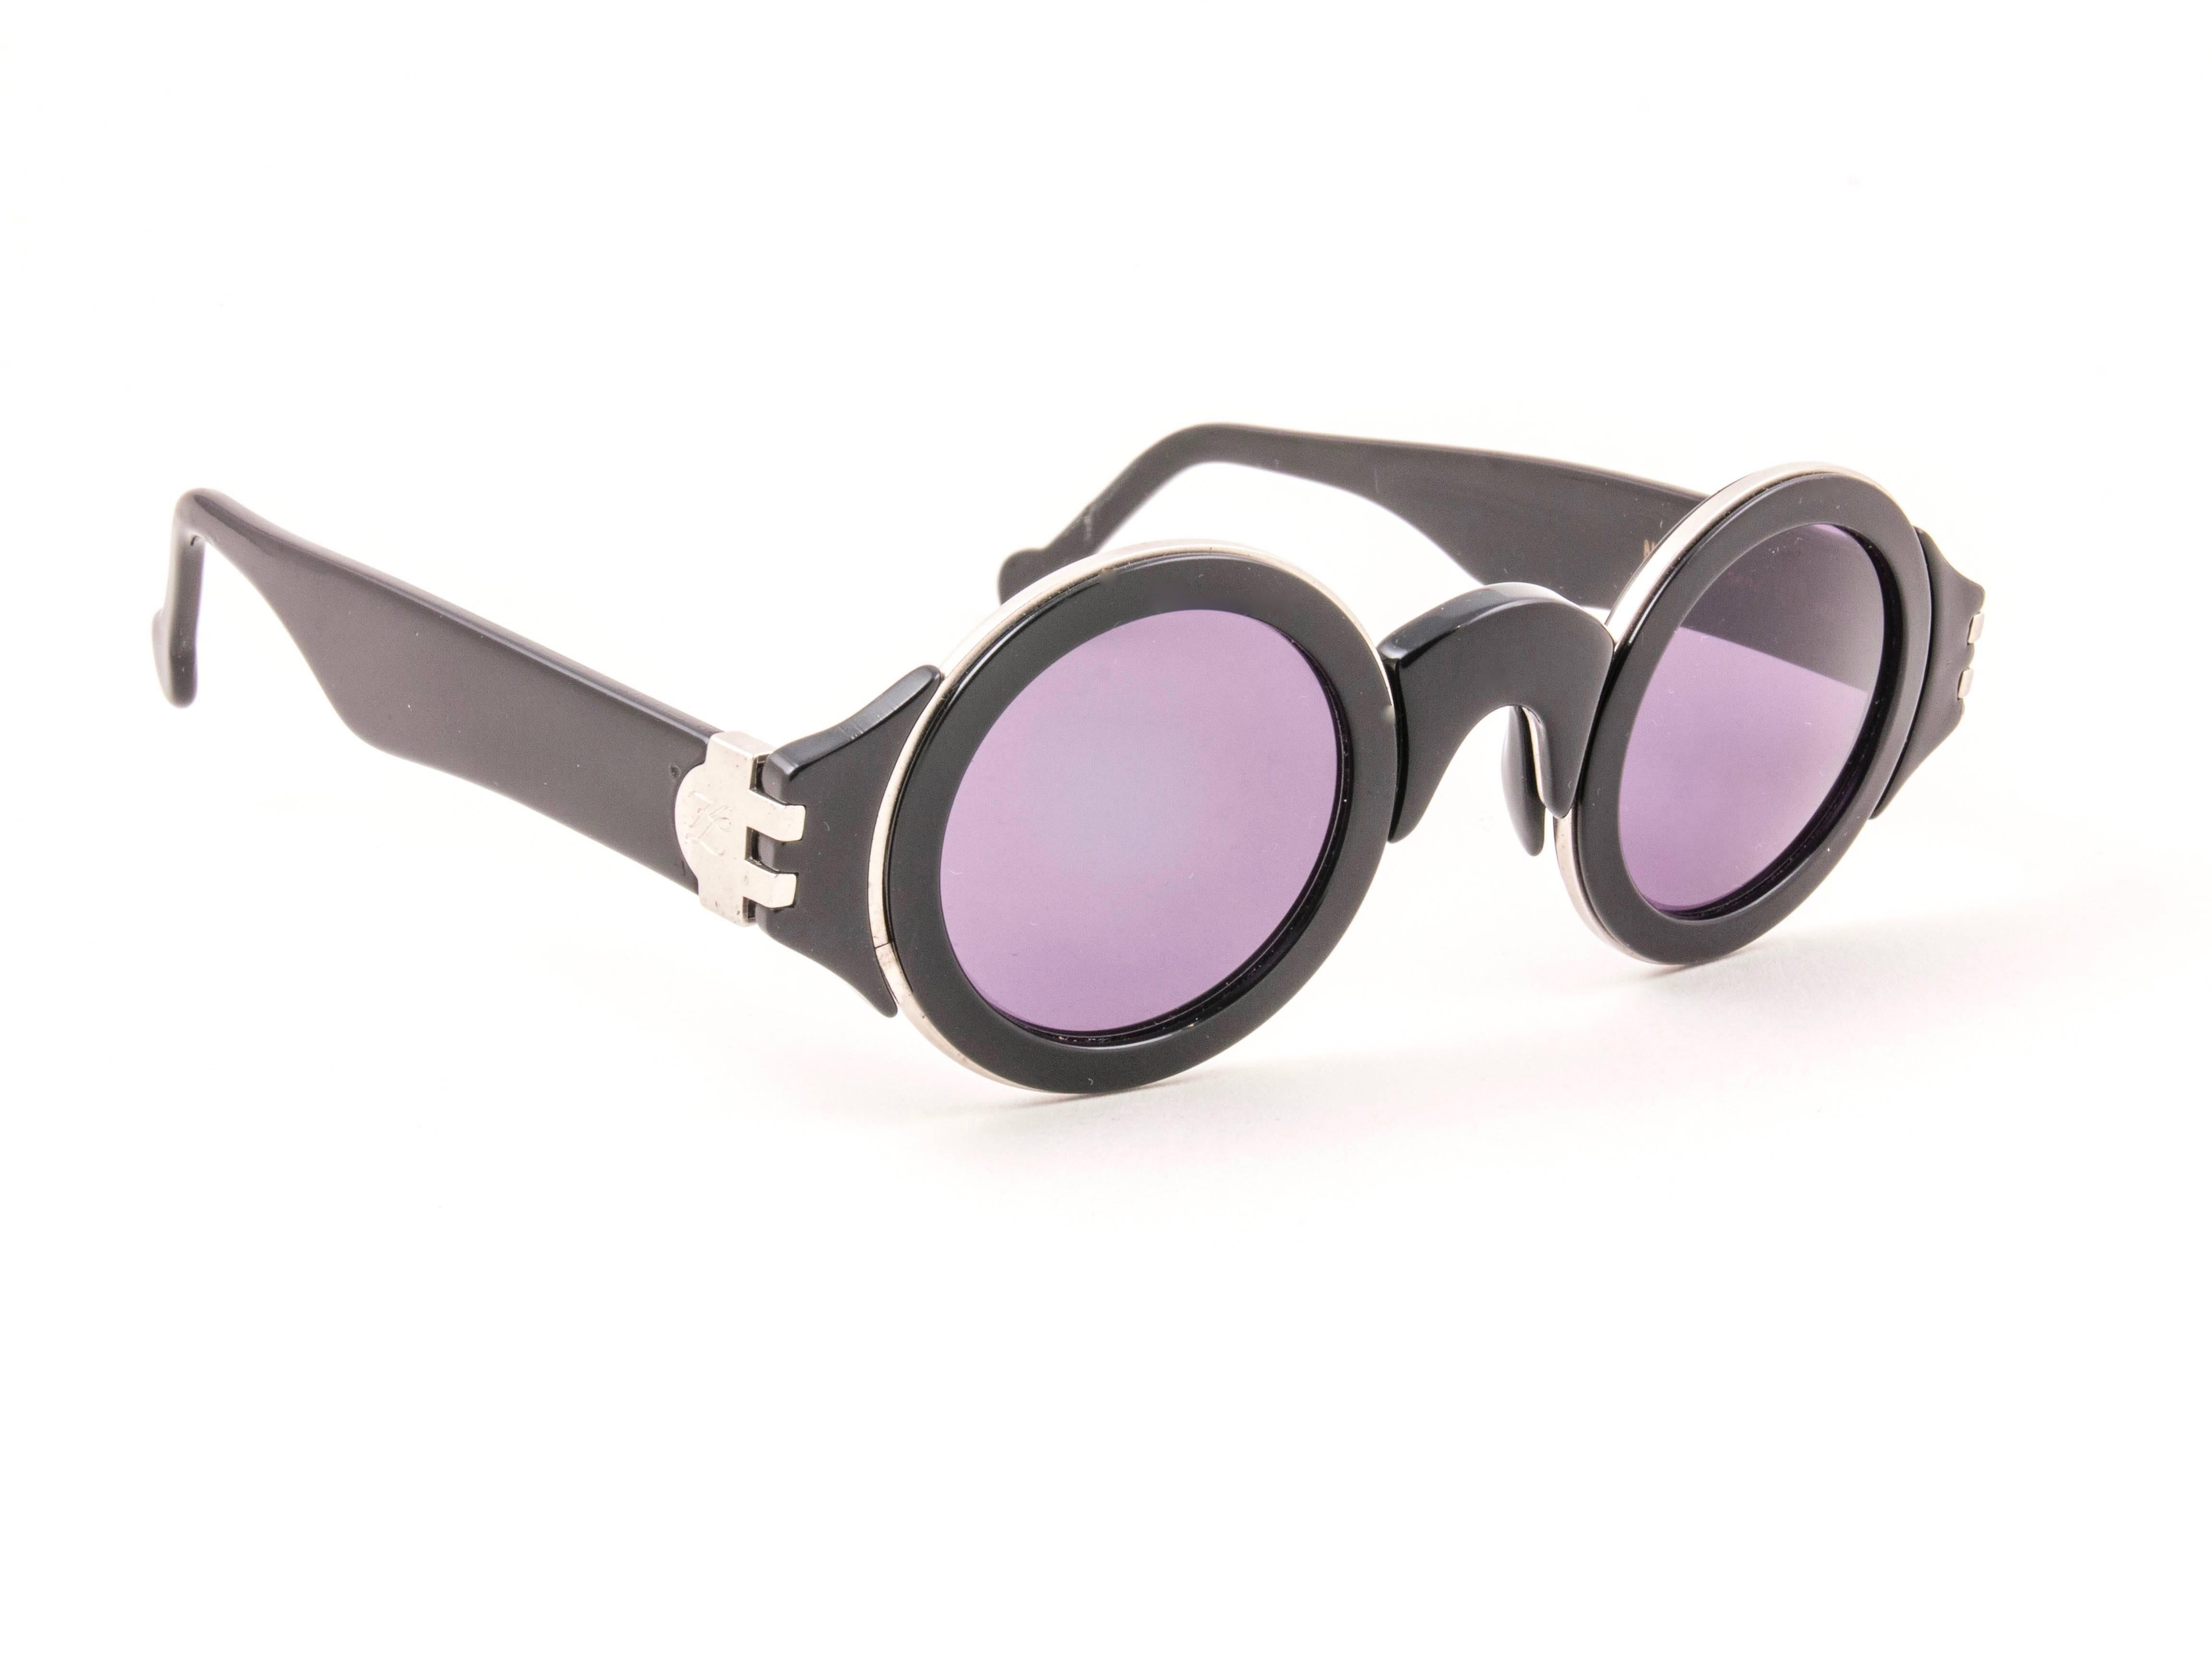 Karl Lagerfeld Vintage Round Black and Silver Sunglasses Made In Germany, 1980s In New Condition For Sale In Baleares, Baleares